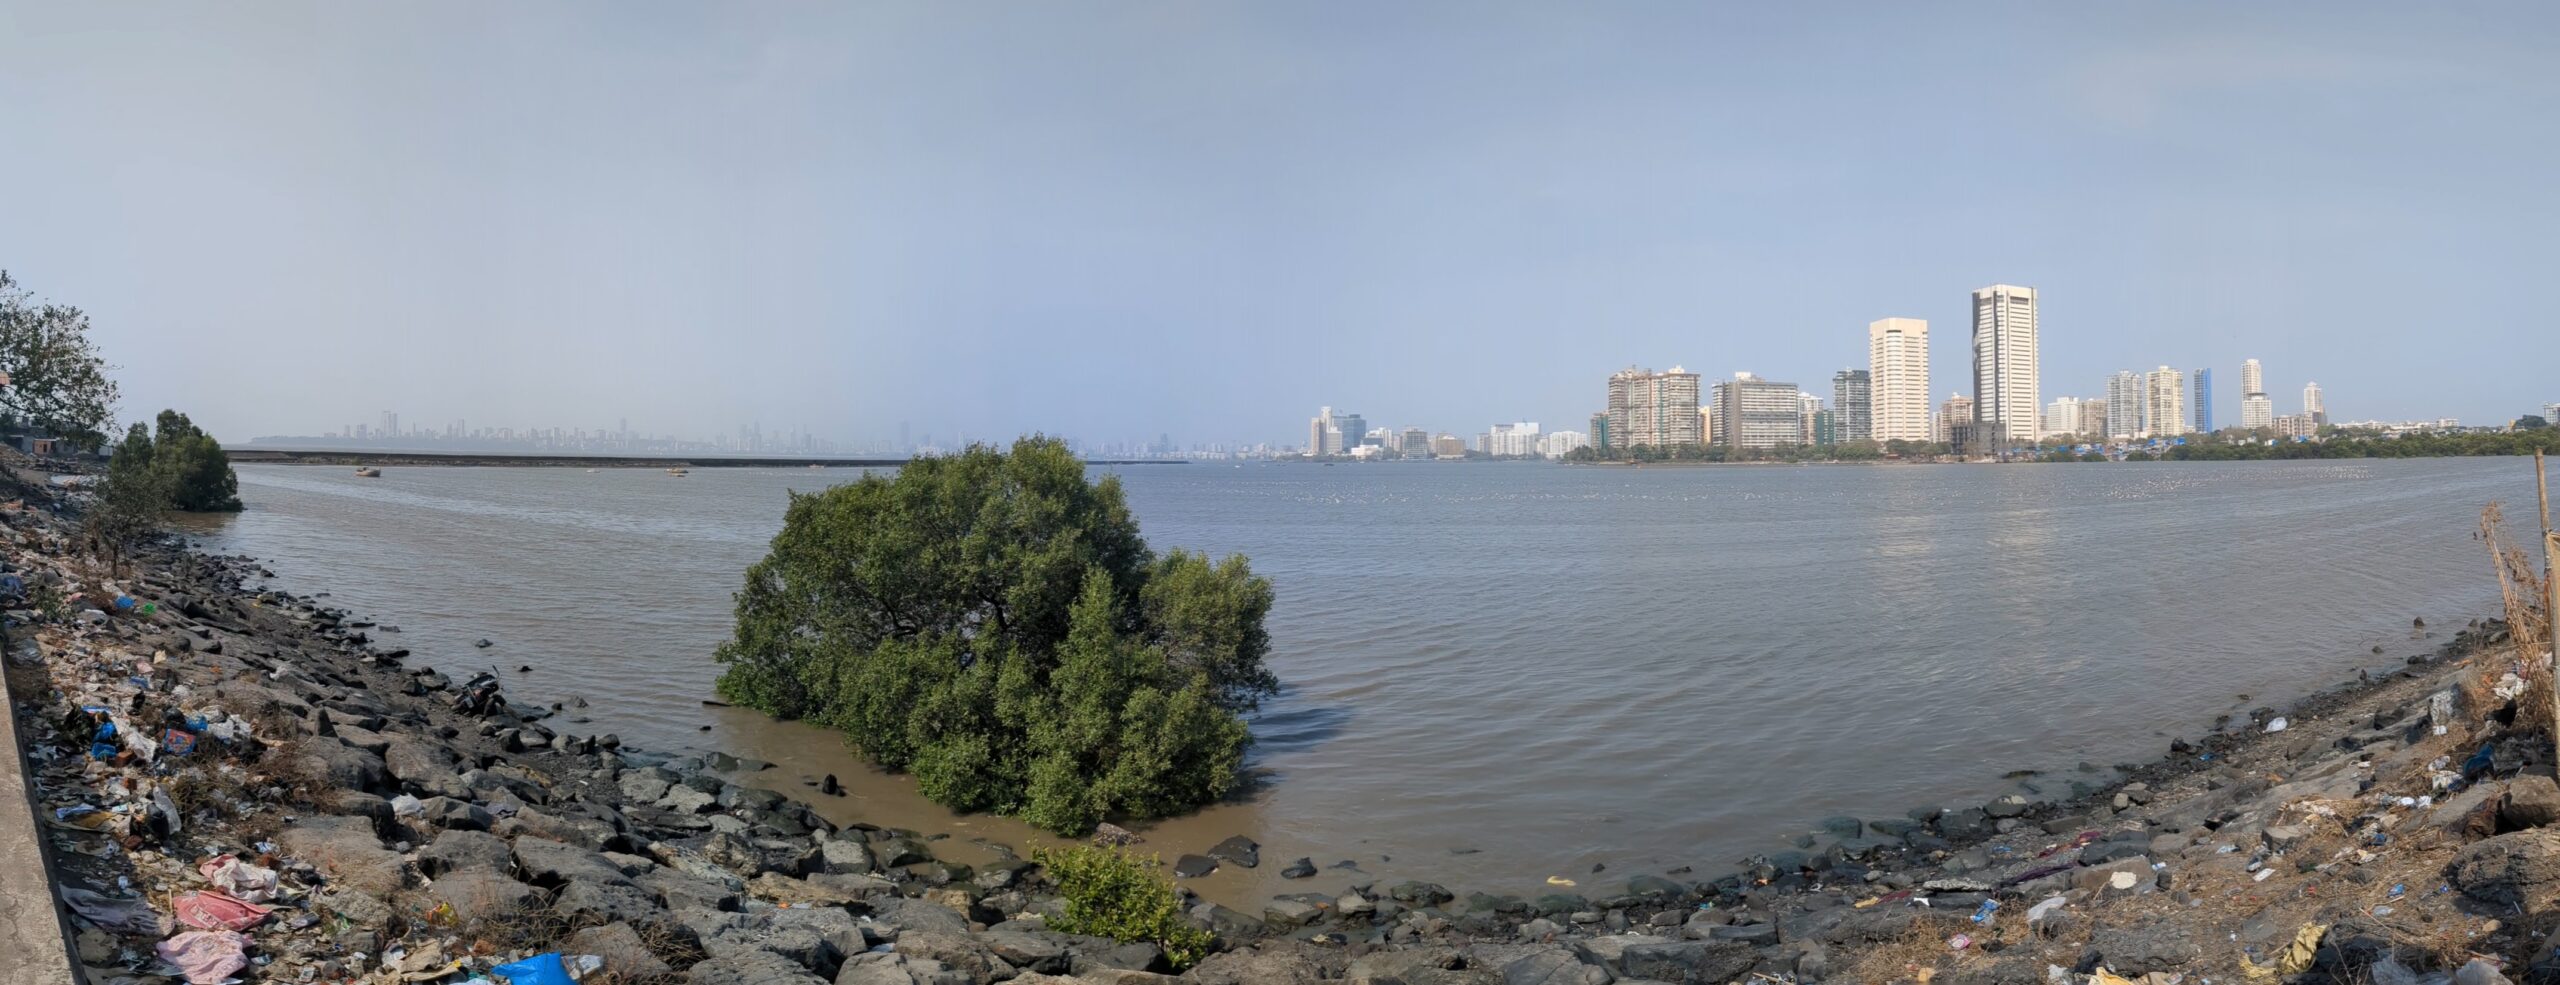 Panoramic view of a bay with some mangroves along a trash-strewn beach in the foreground, and a city skyline on the other side of the water in the background.